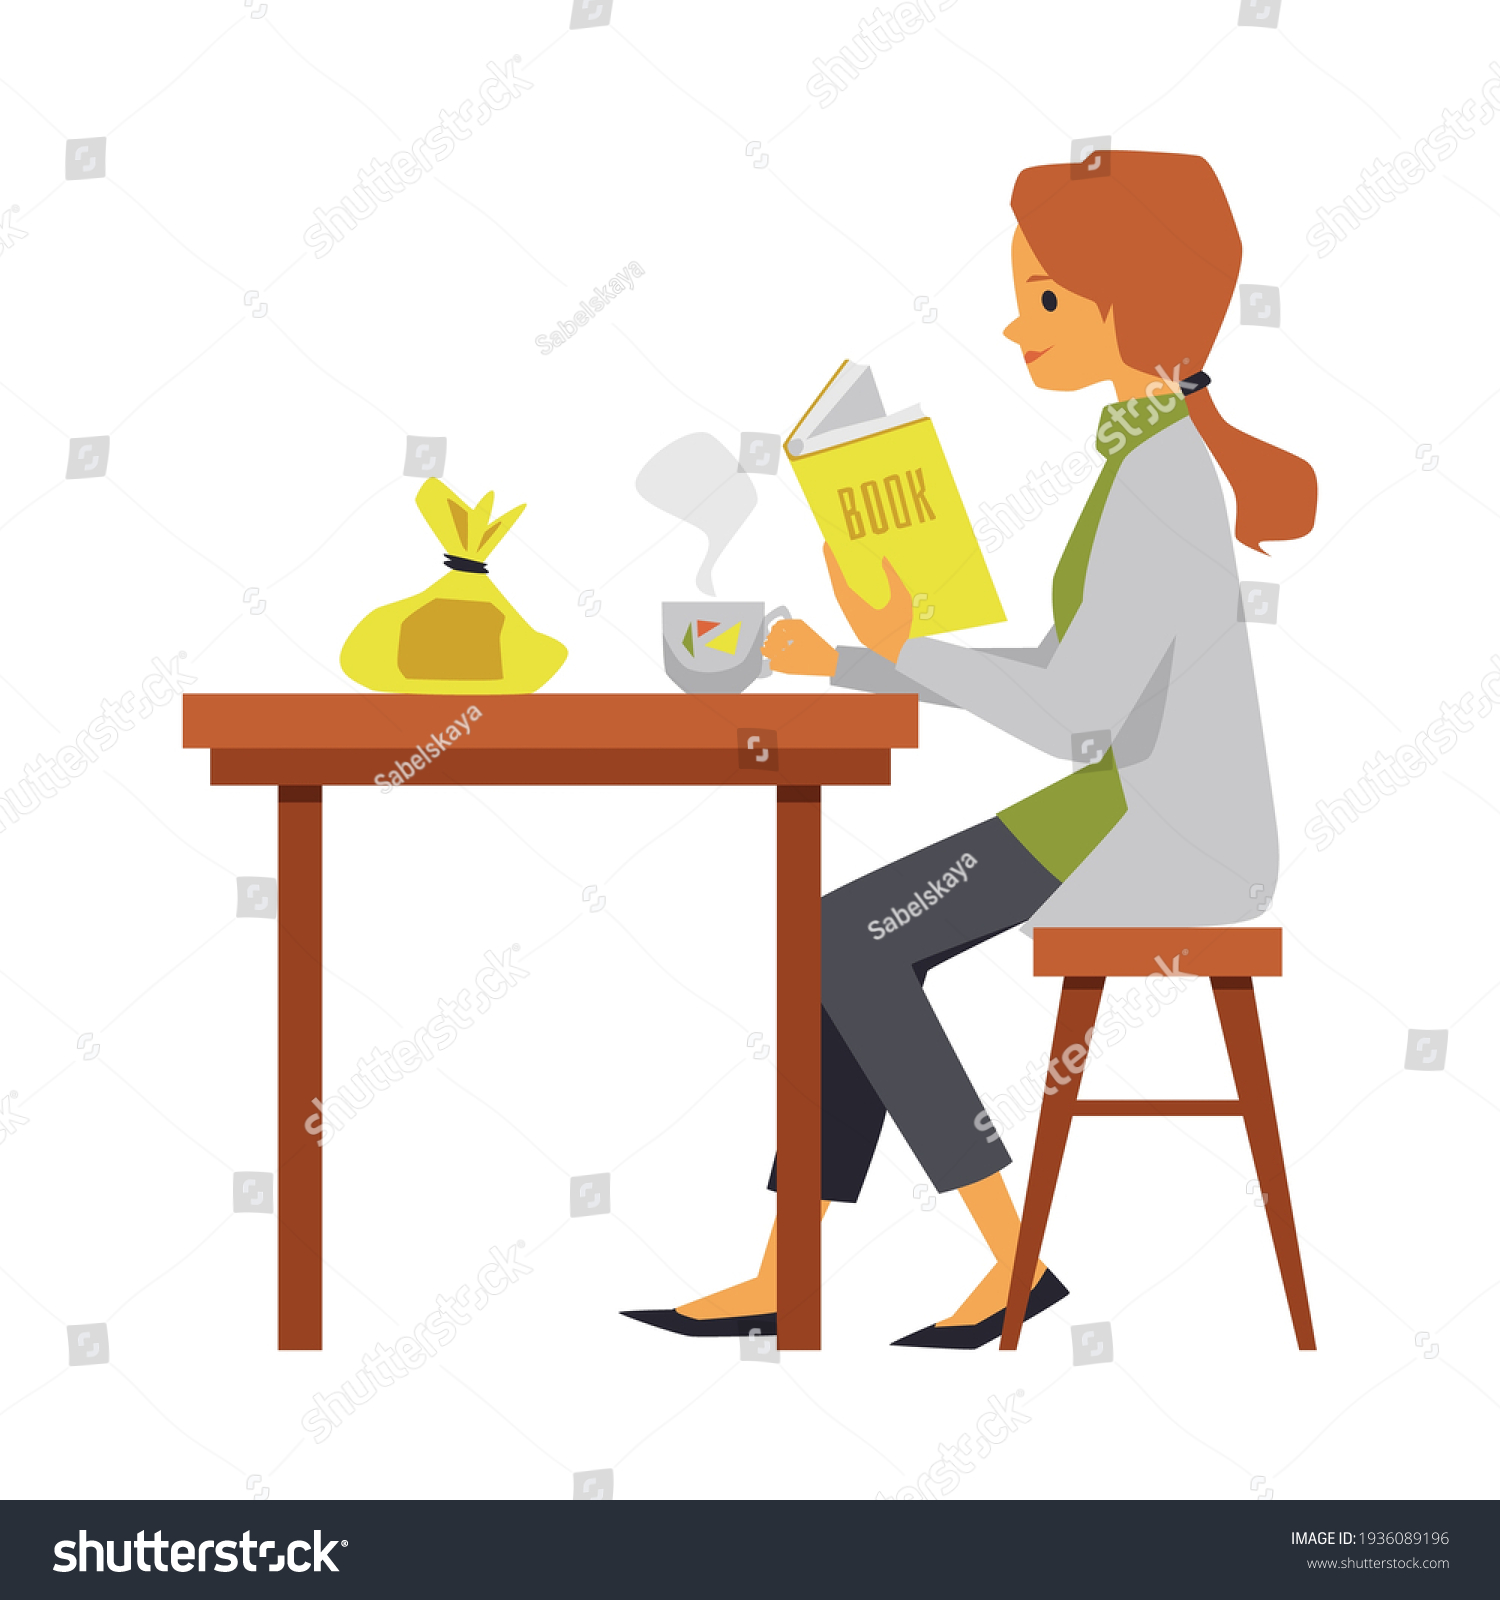 She is sitting at the table. He is sitting at the Table.. A girl sitting at a Table holding a book-1. She is sitting on the Table.